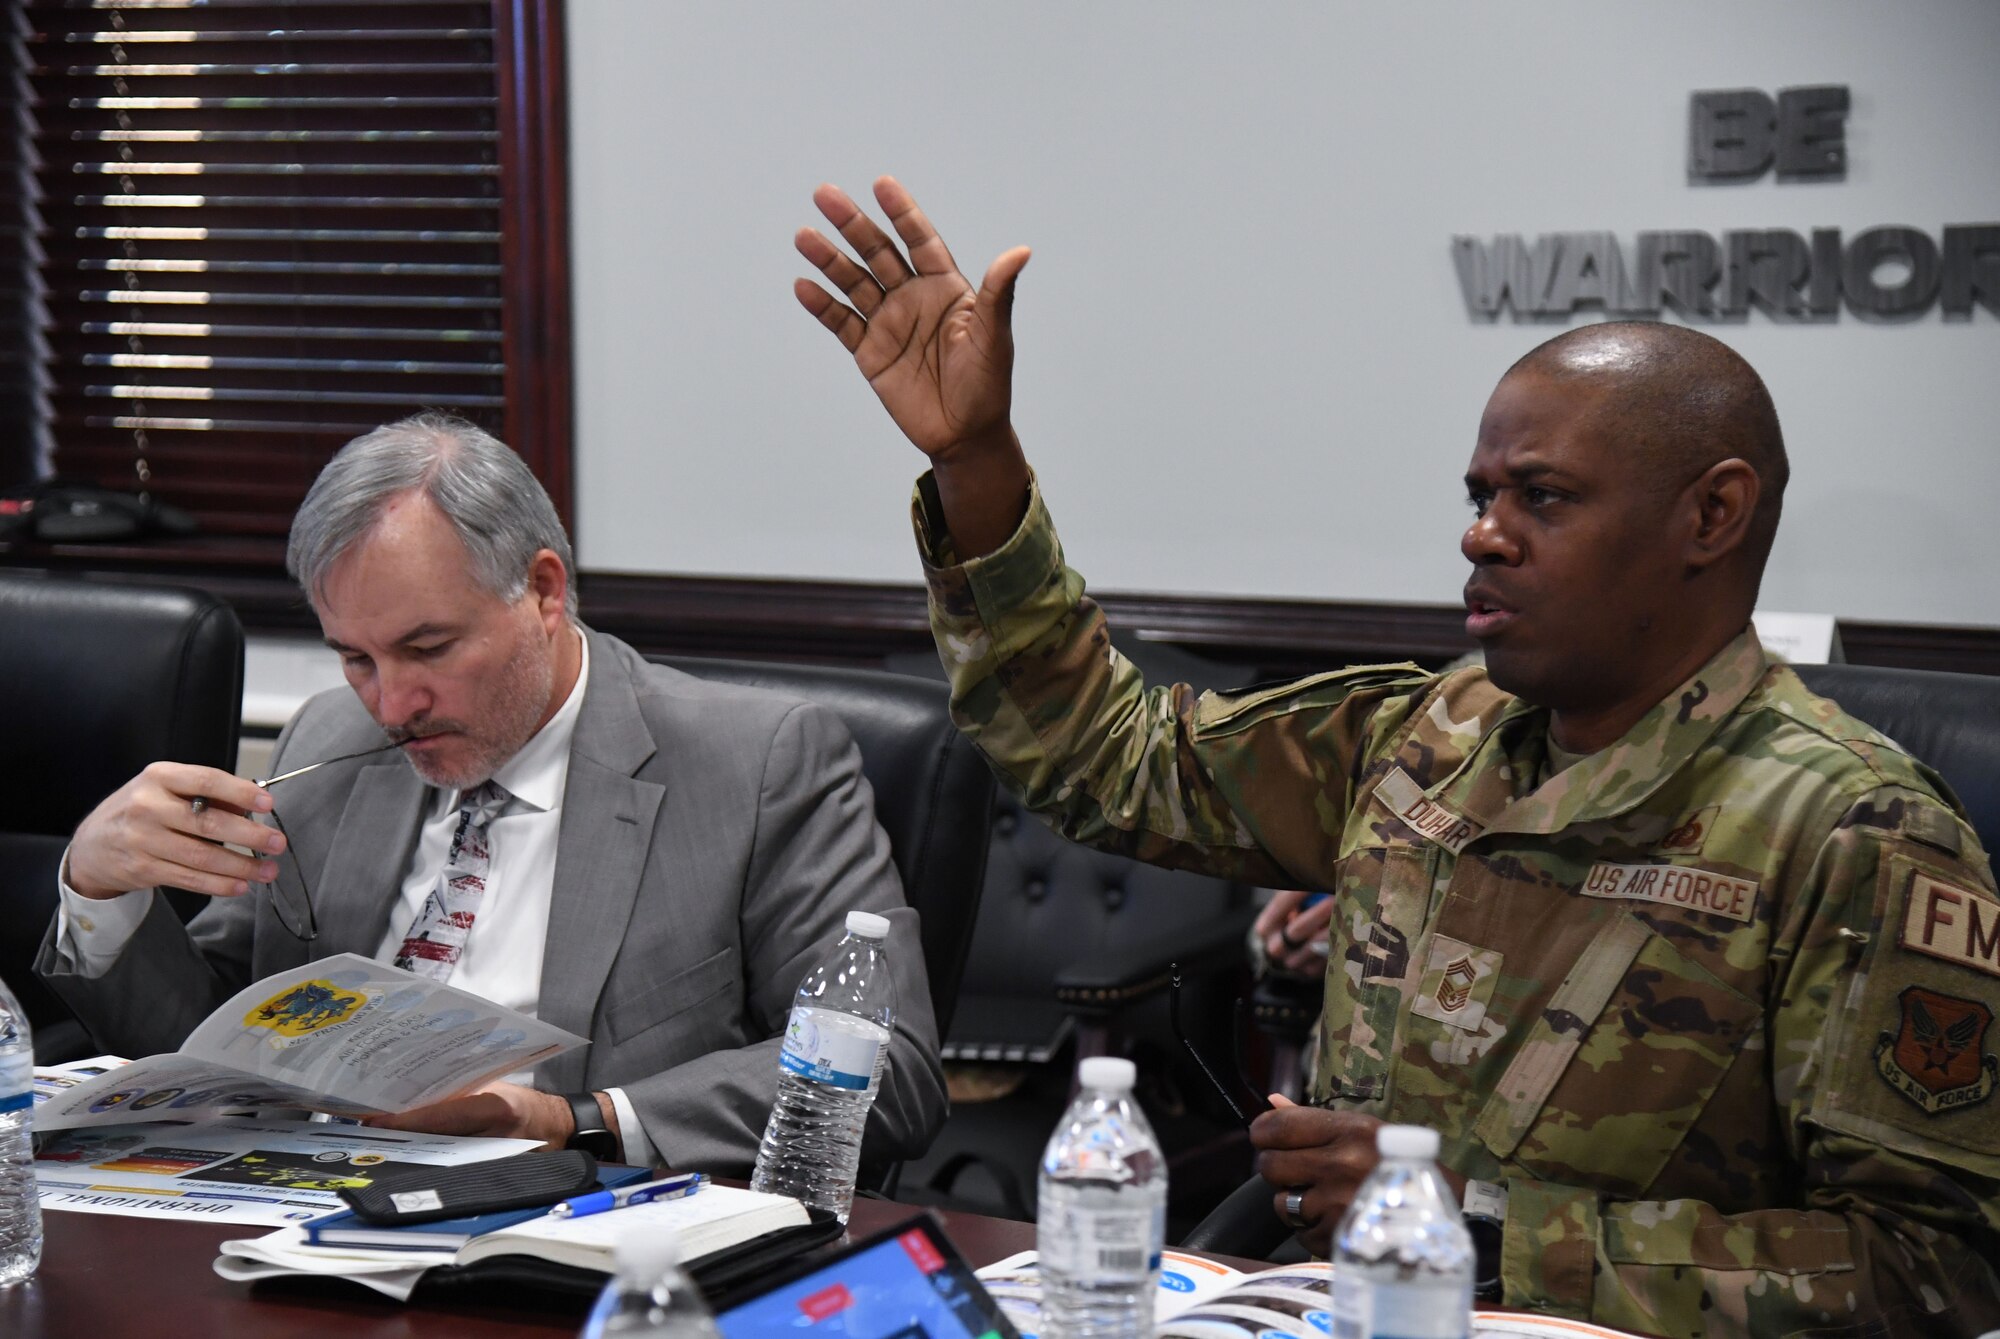 U.S. Air Force Chief Master Sgt. Kaci Duhart, Assistant Secretary of the Air Force executive for enlisted matters, attends a wing mission brief inside the 81st Training Wing headquarters building at Keesler Air Force Base, Mississippi, Jan. 27, 2023.